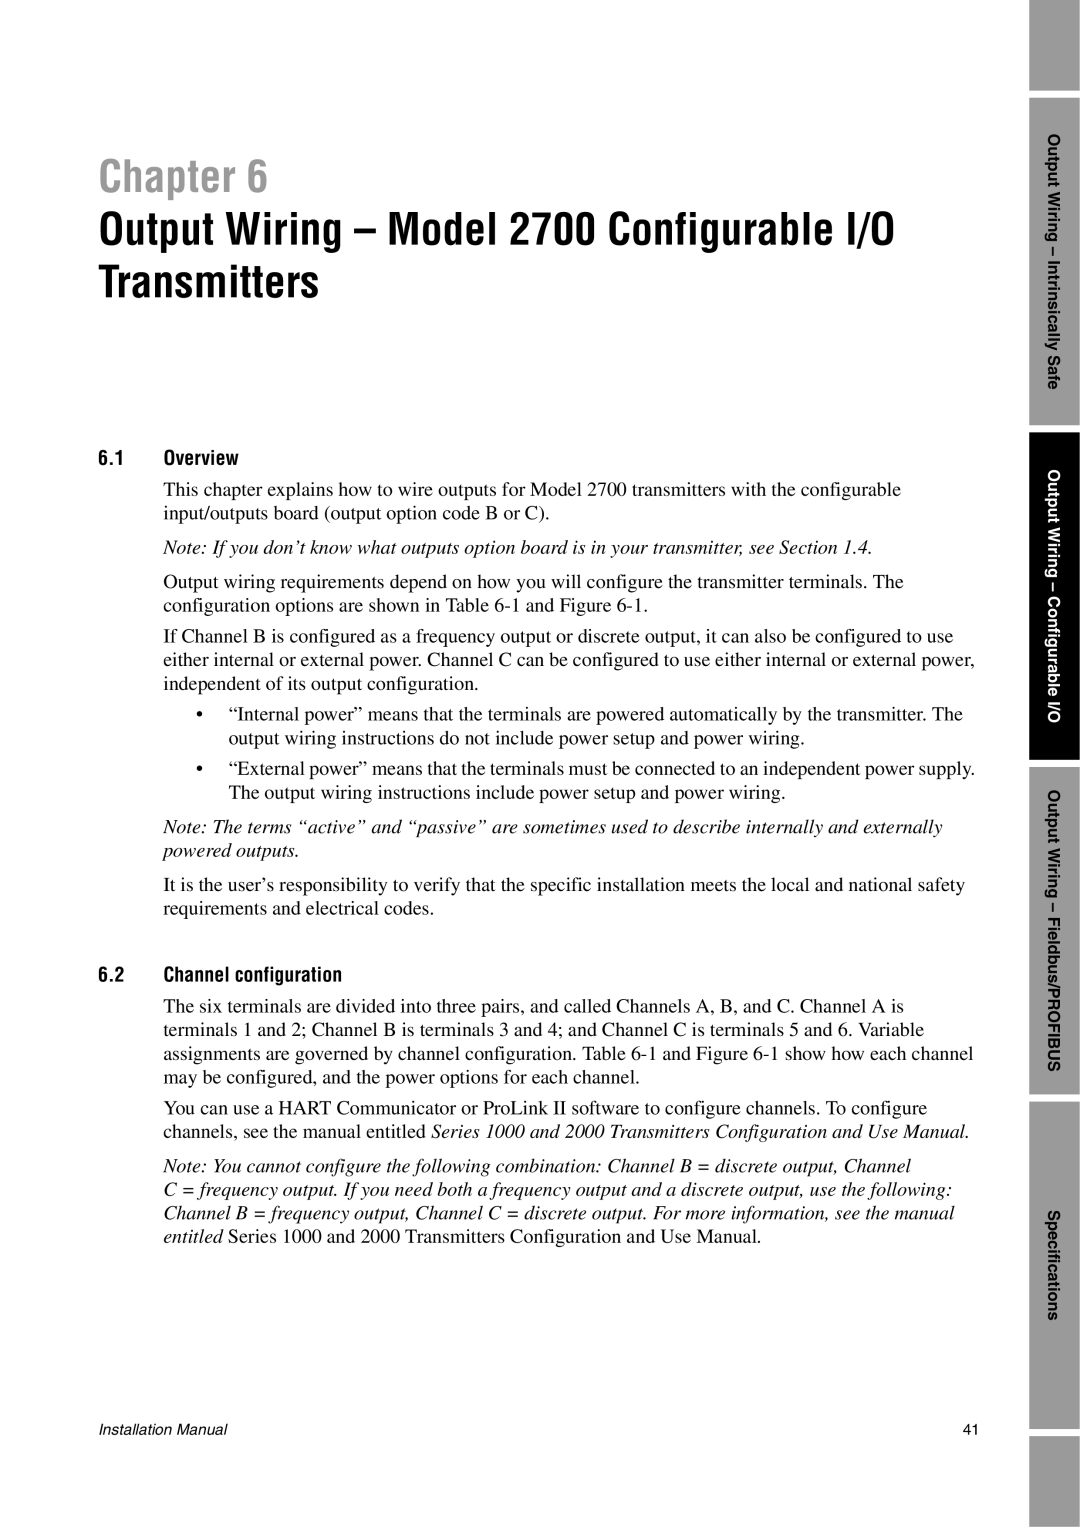 Emerson 1700 Output Wiring - Model 2700 Configurable I/O, Transmitters, Chapter, 6.1Overview, 6.2Channel configuration 